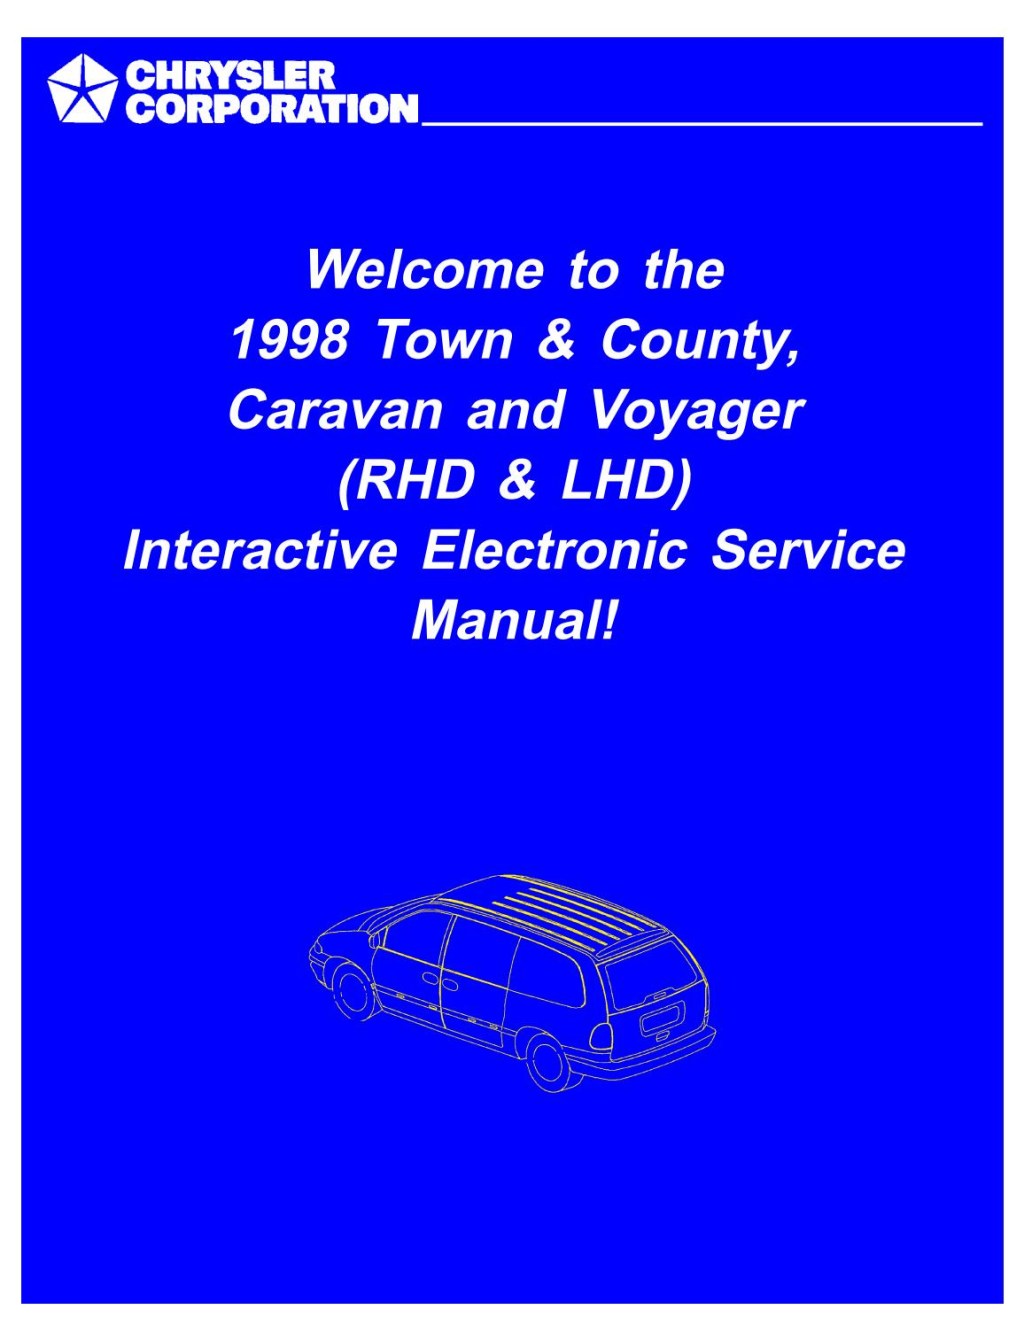 Picture of: DODGE CARAVAN Service Repair Manual by xed – Issuu